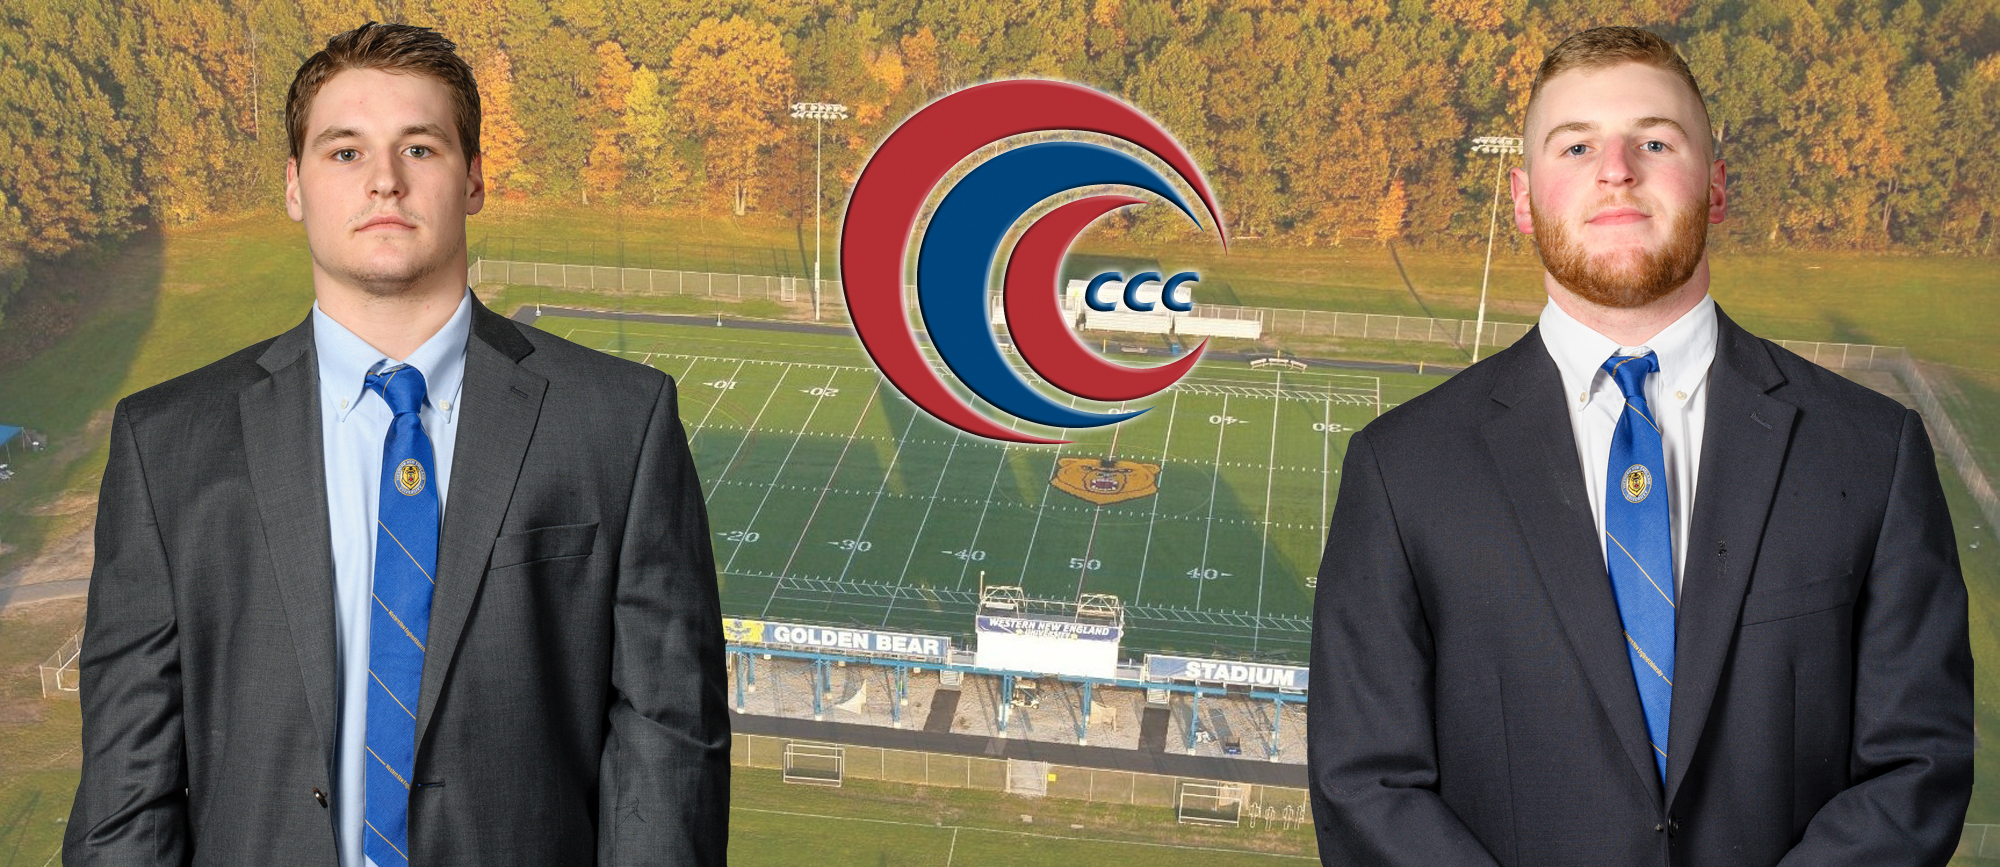 Beauchamp & Kerr Collect CCC Weekly Accolades